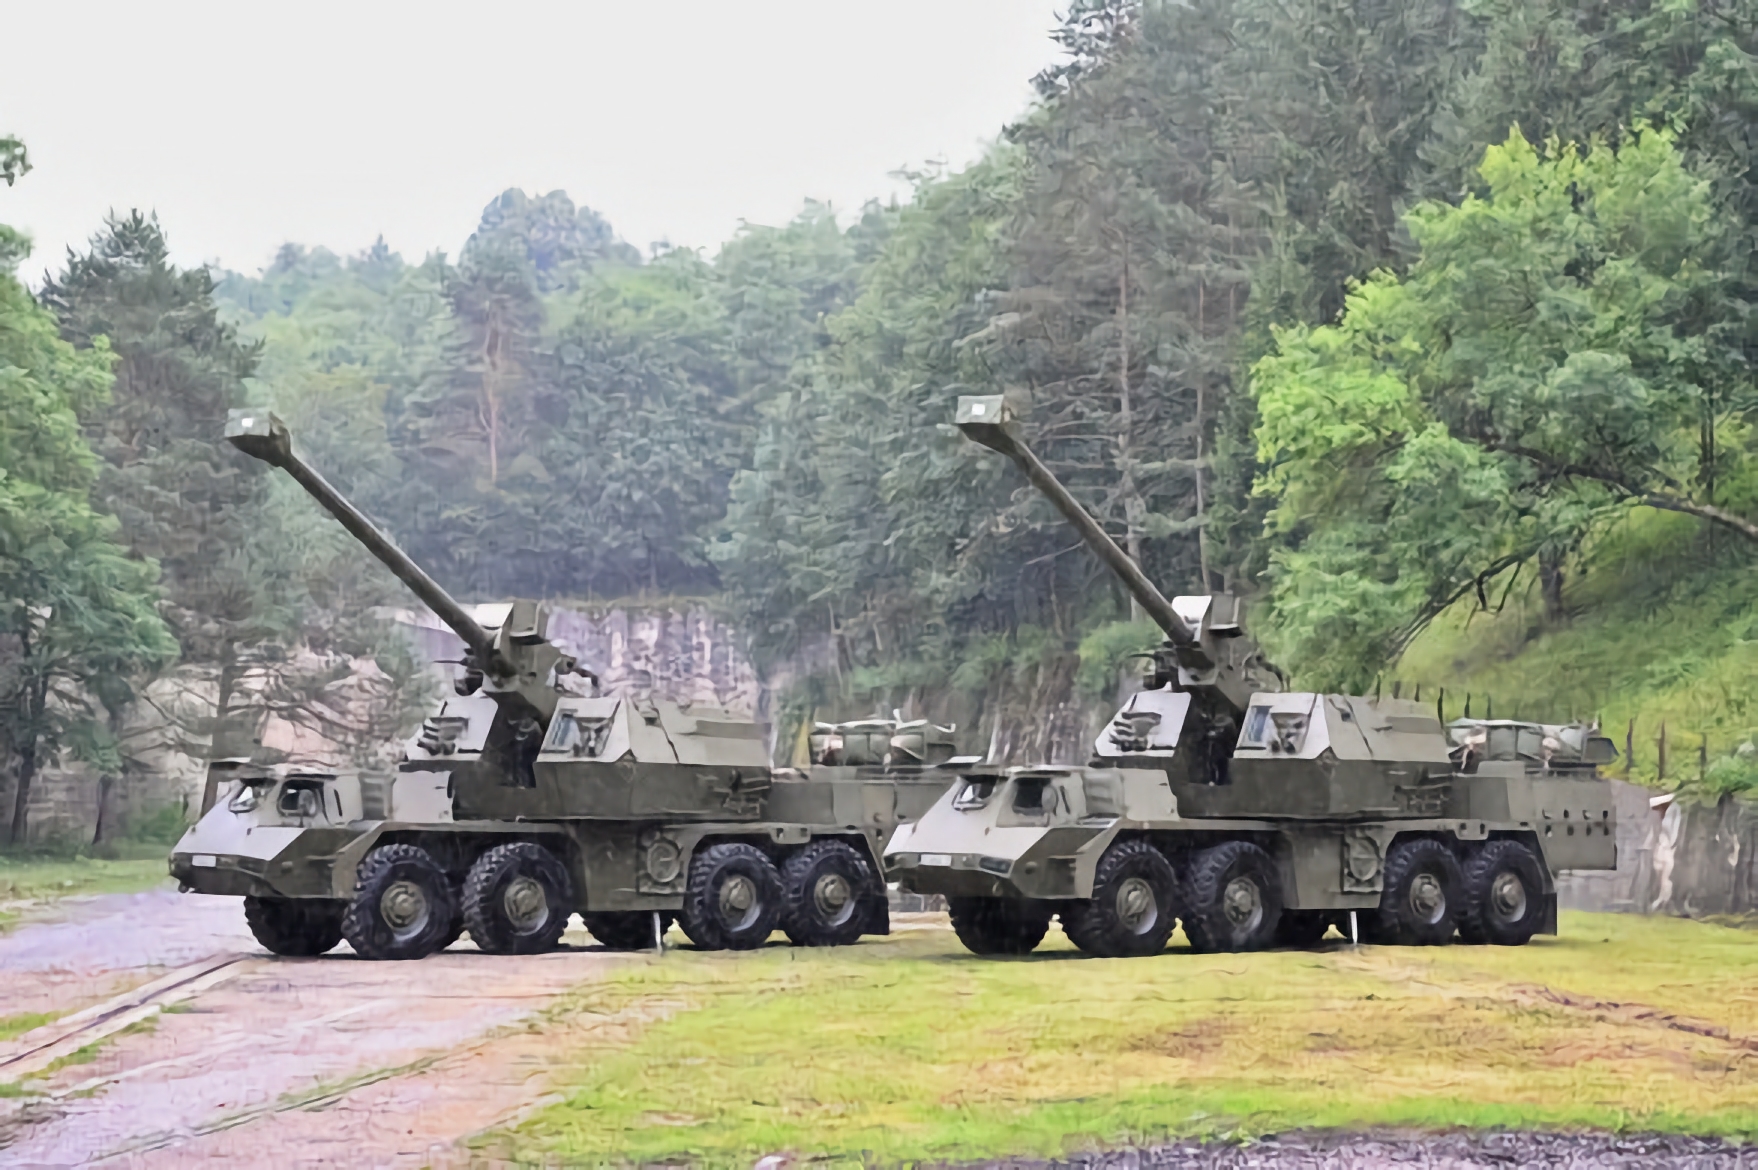 Slovakia has handed over the first two Zuzana 2 self-propelled artillery units to the Ukrainian Armed Forces under a 90m-euro contract